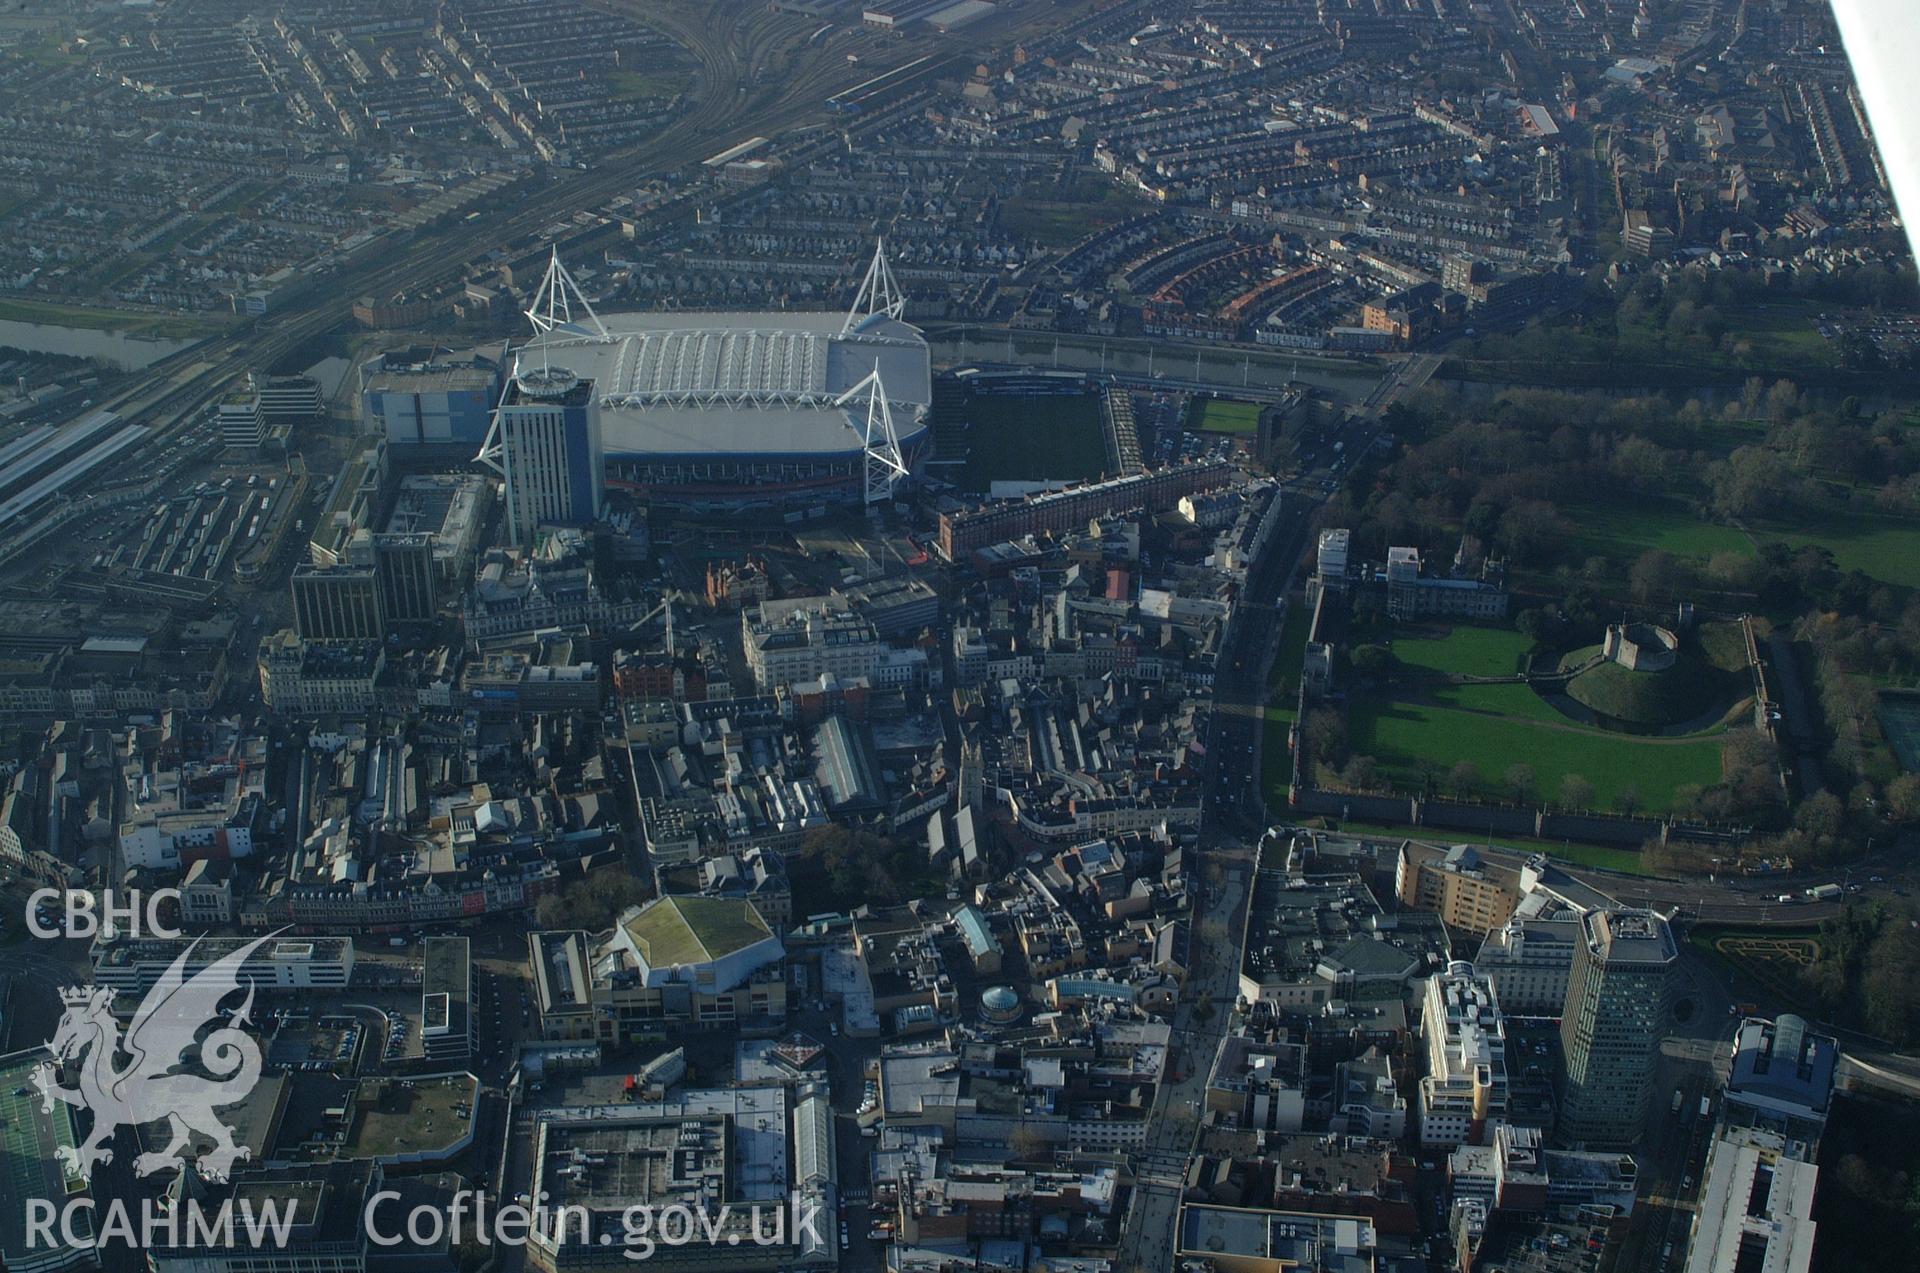 RCAHMW colour oblique aerial photograph of Cardiff taken on 13/01/2005 by Toby Driver